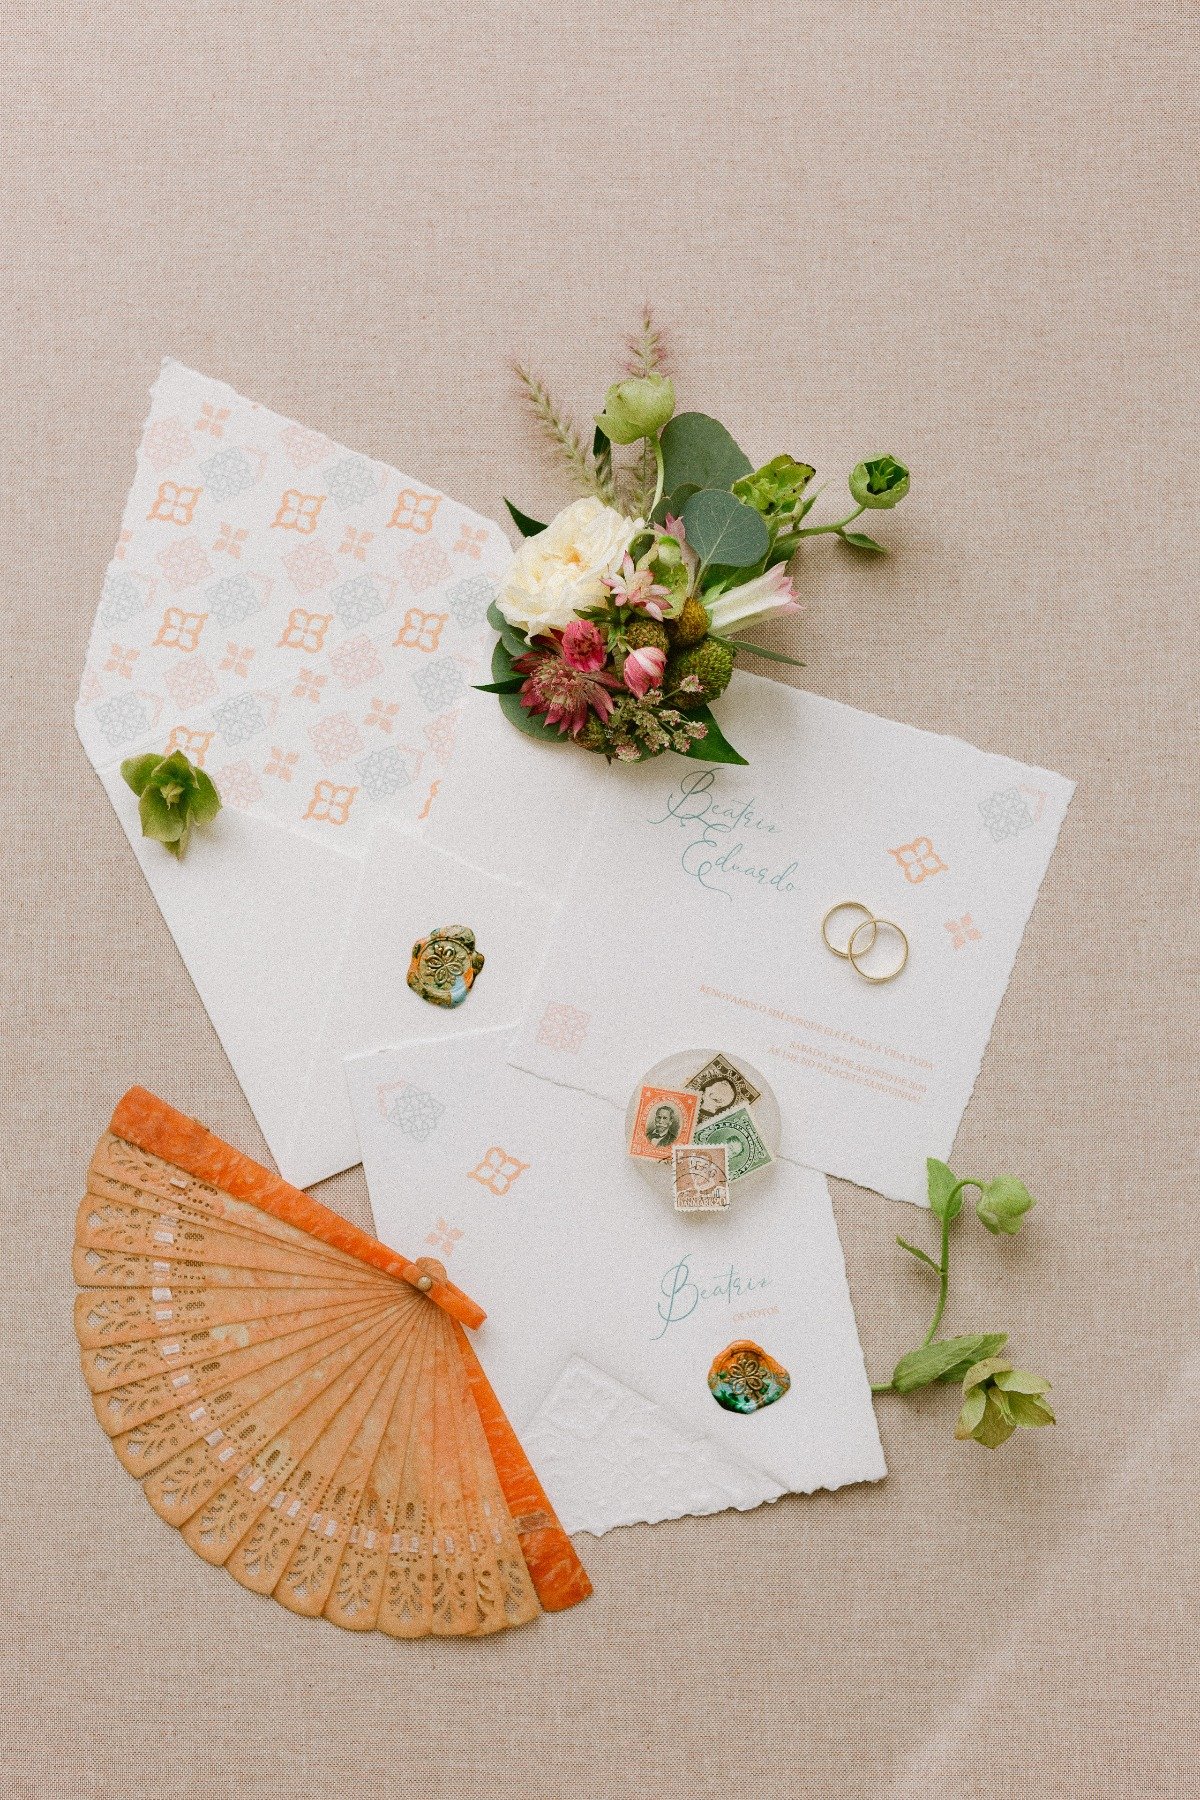 one of a kind wedding stationery created by A Pajarita